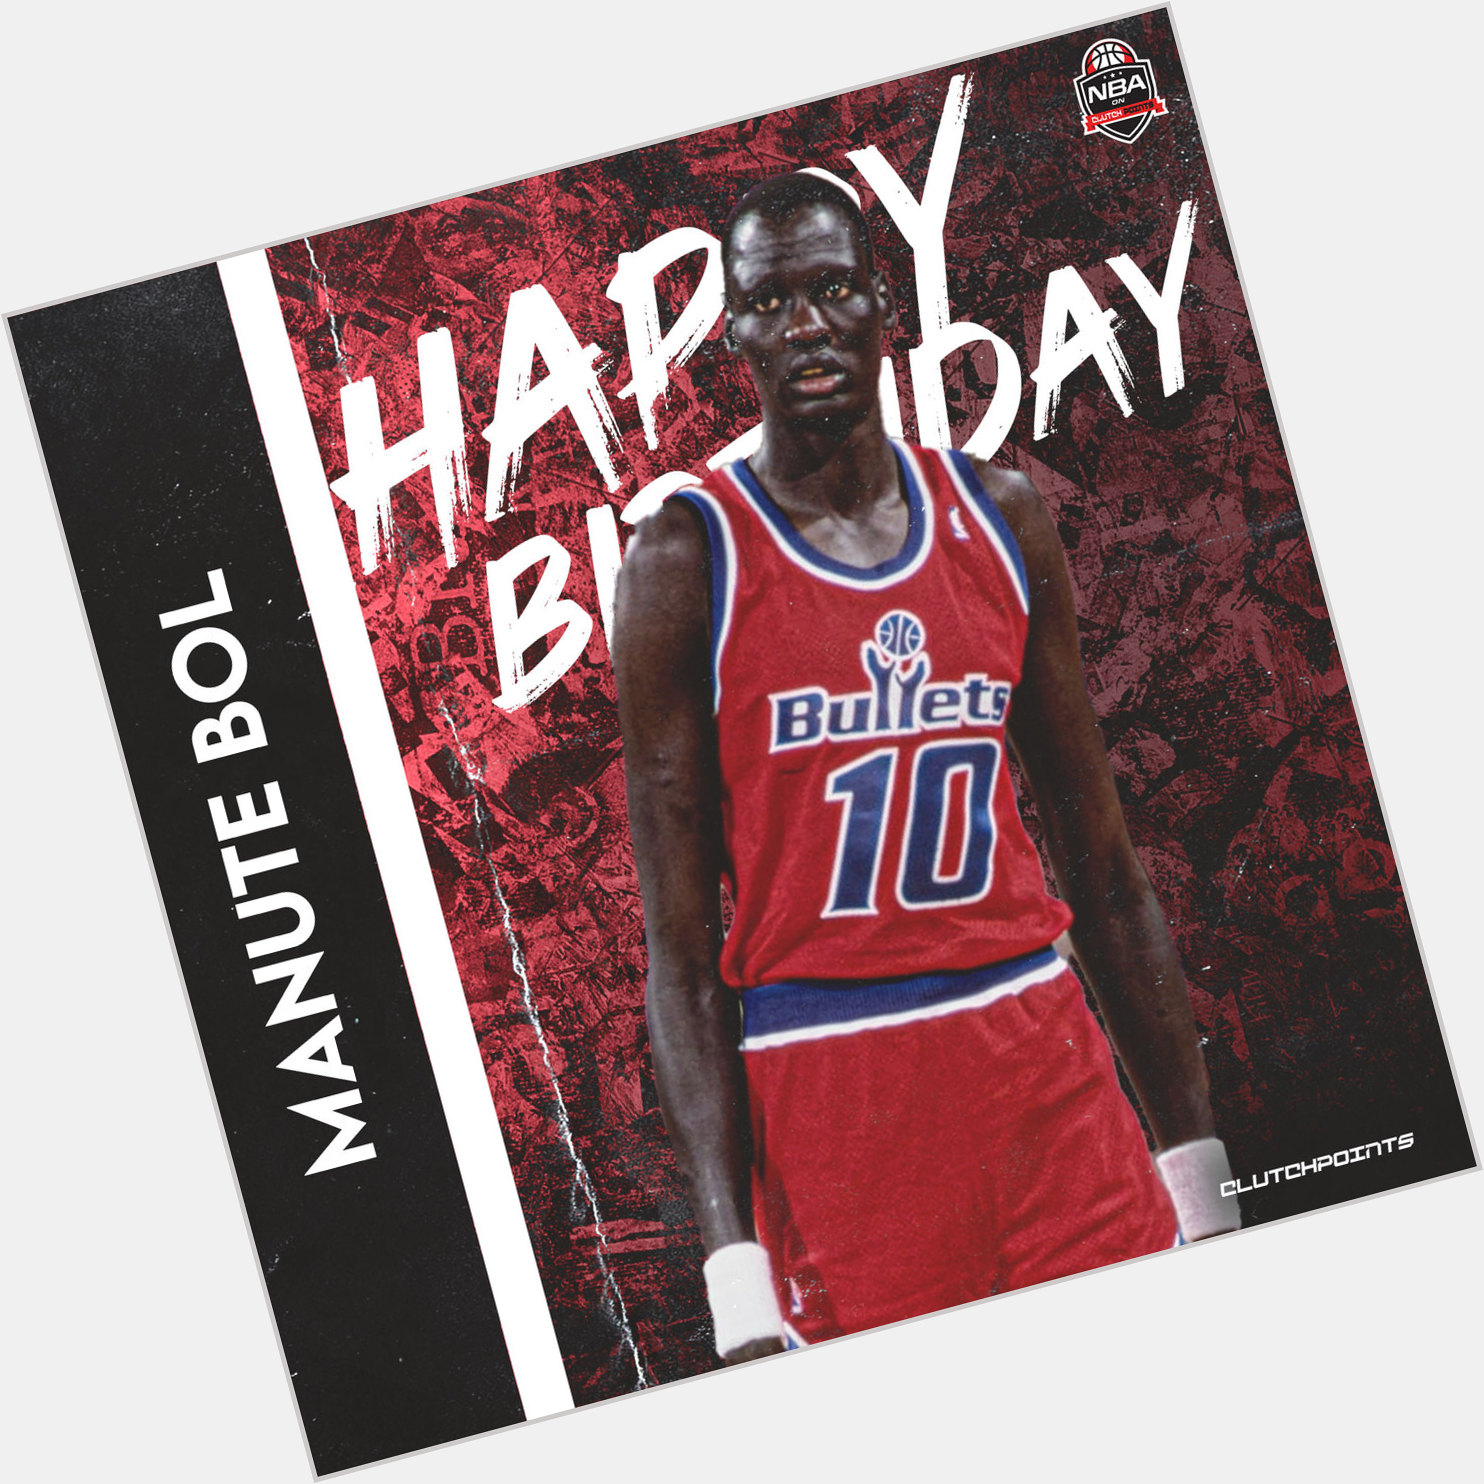 Manute Bol would have been 59 today.

Happy Birthday, Manute! 